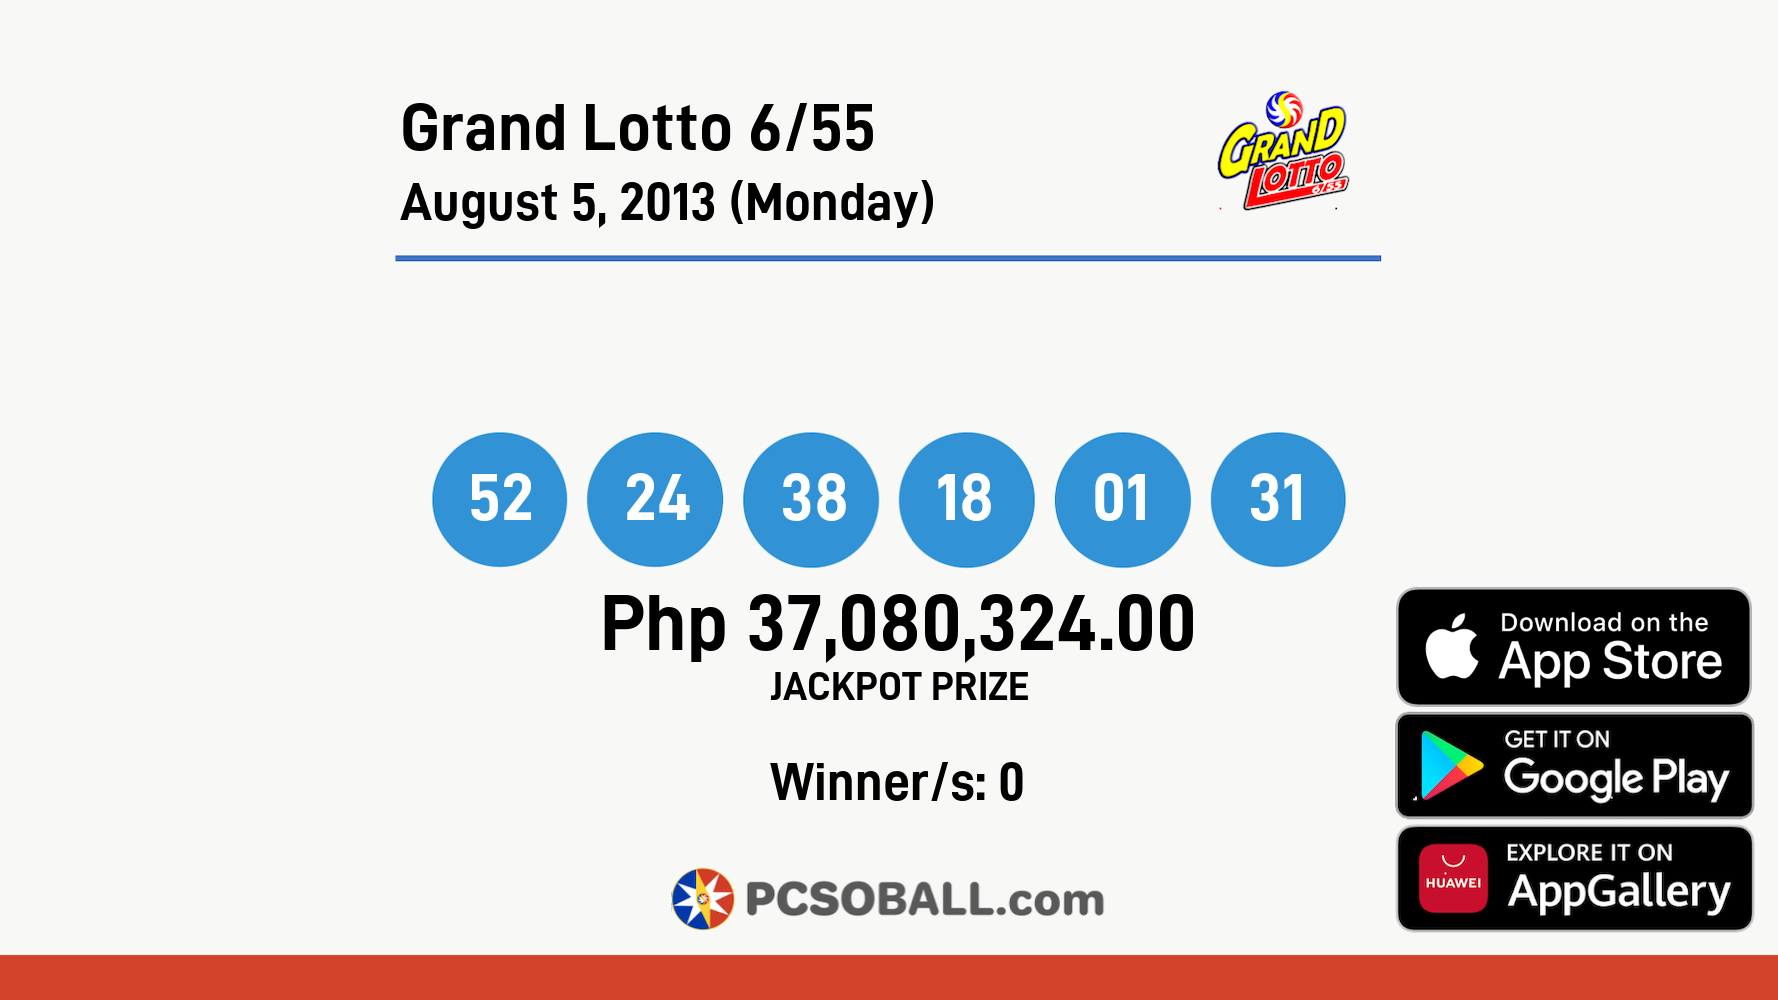 Grand Lotto 6/55 August 5, 2013 (Monday) Result